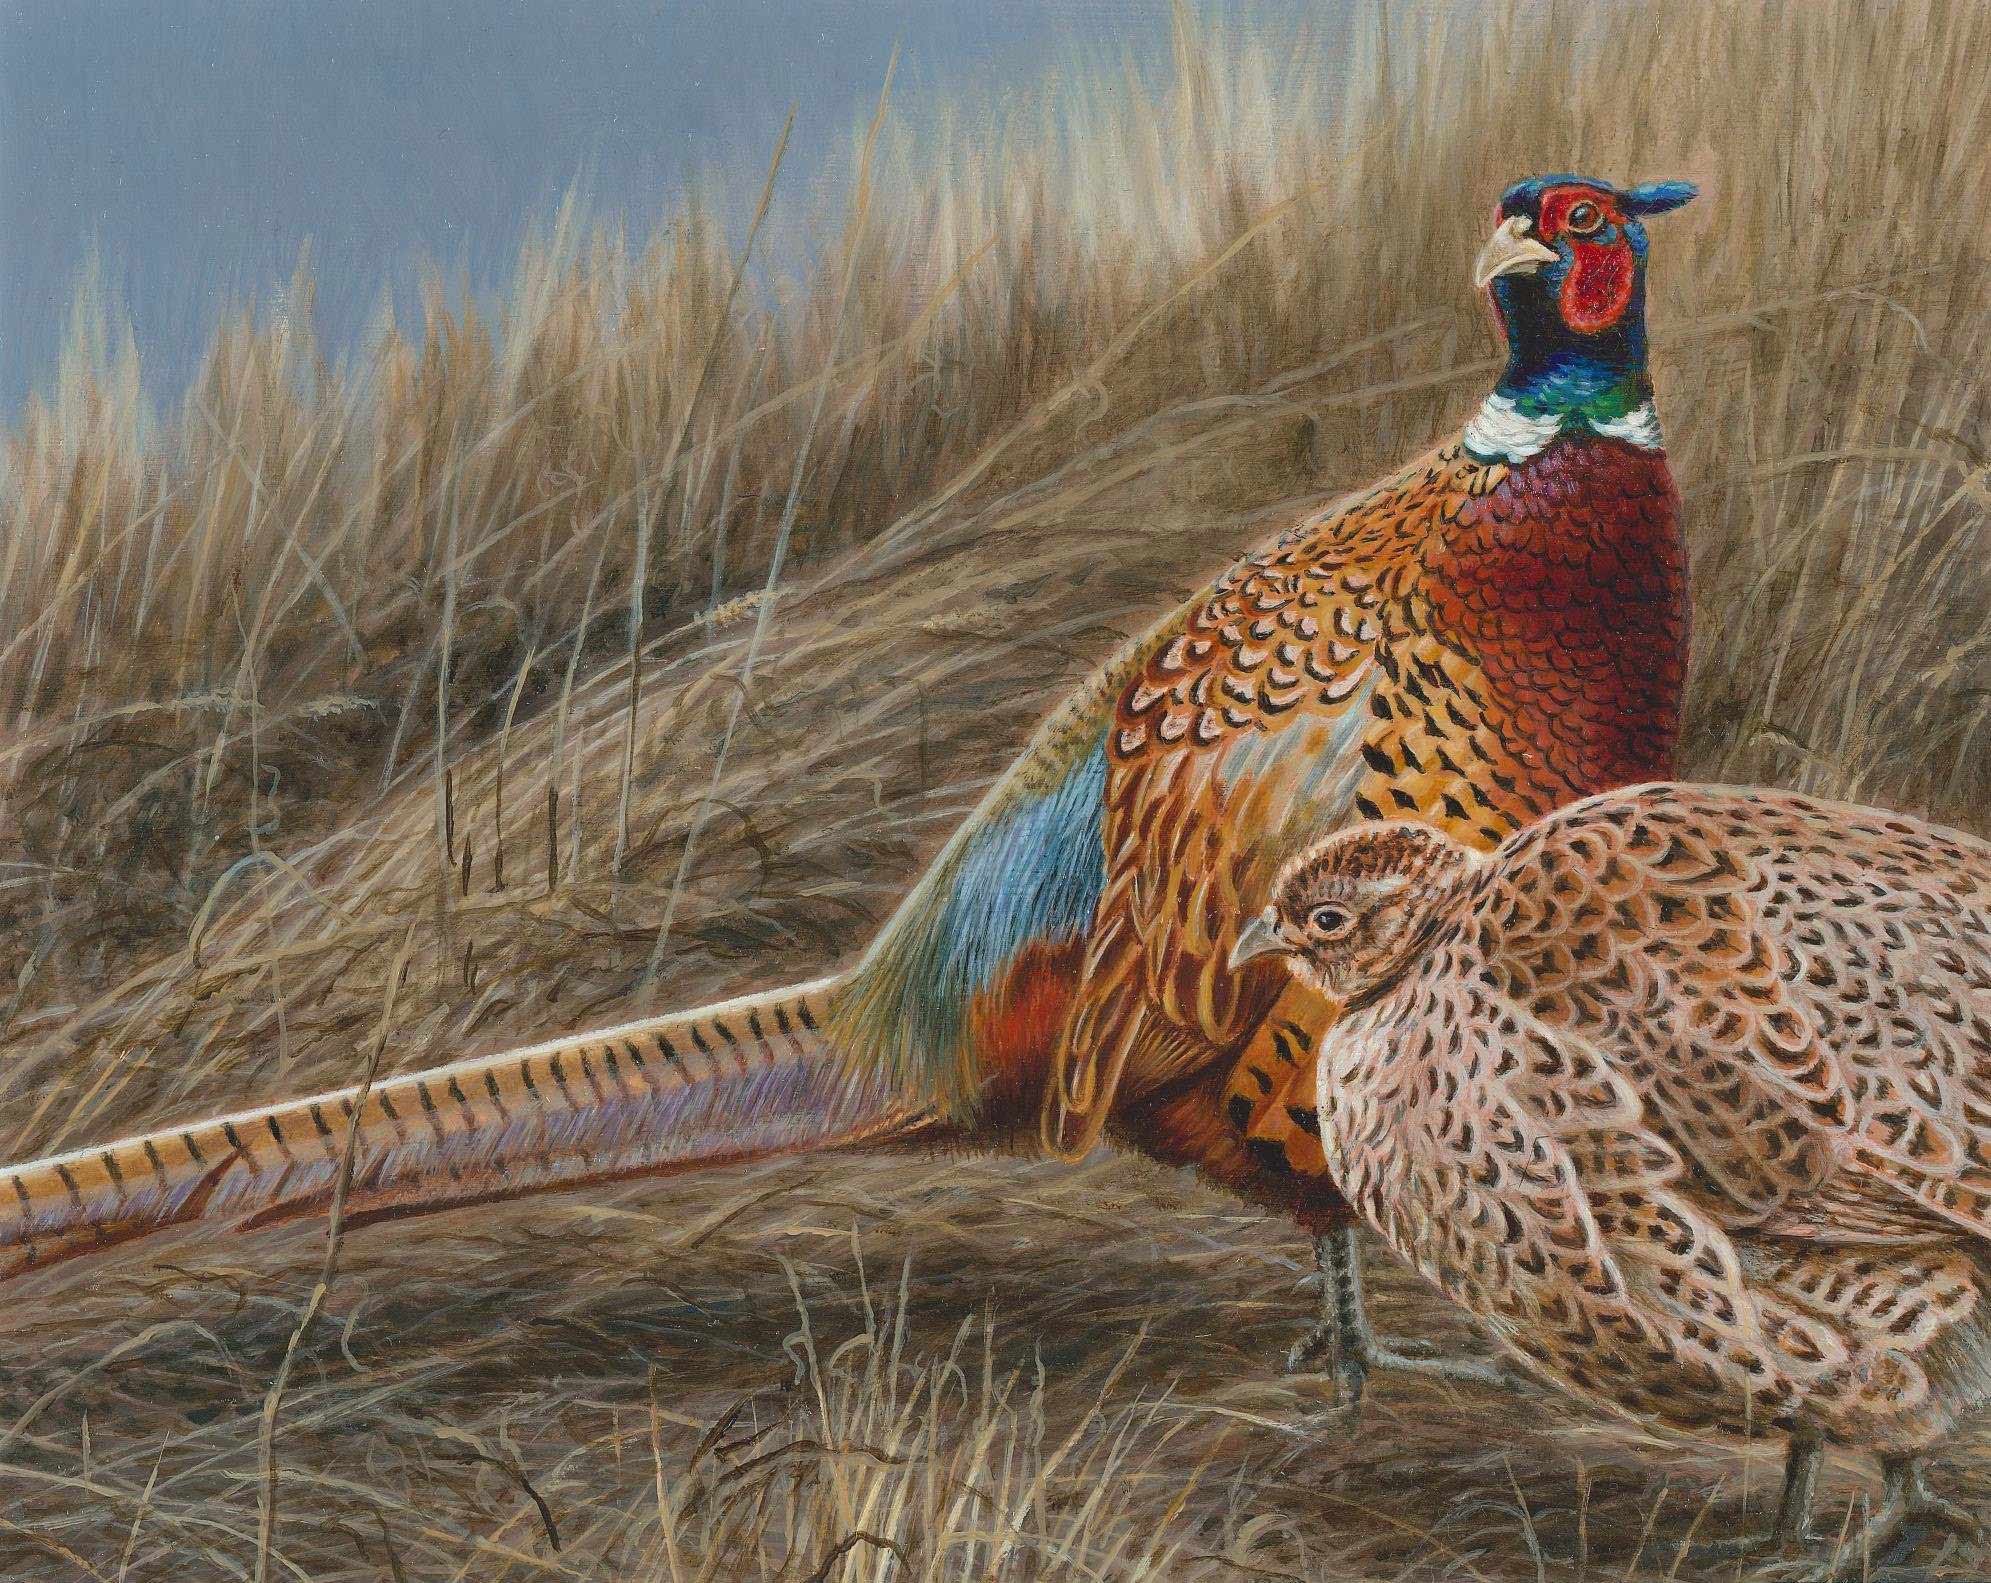 Brian Kuether is the winner of the 2020 pheasant stamp contest